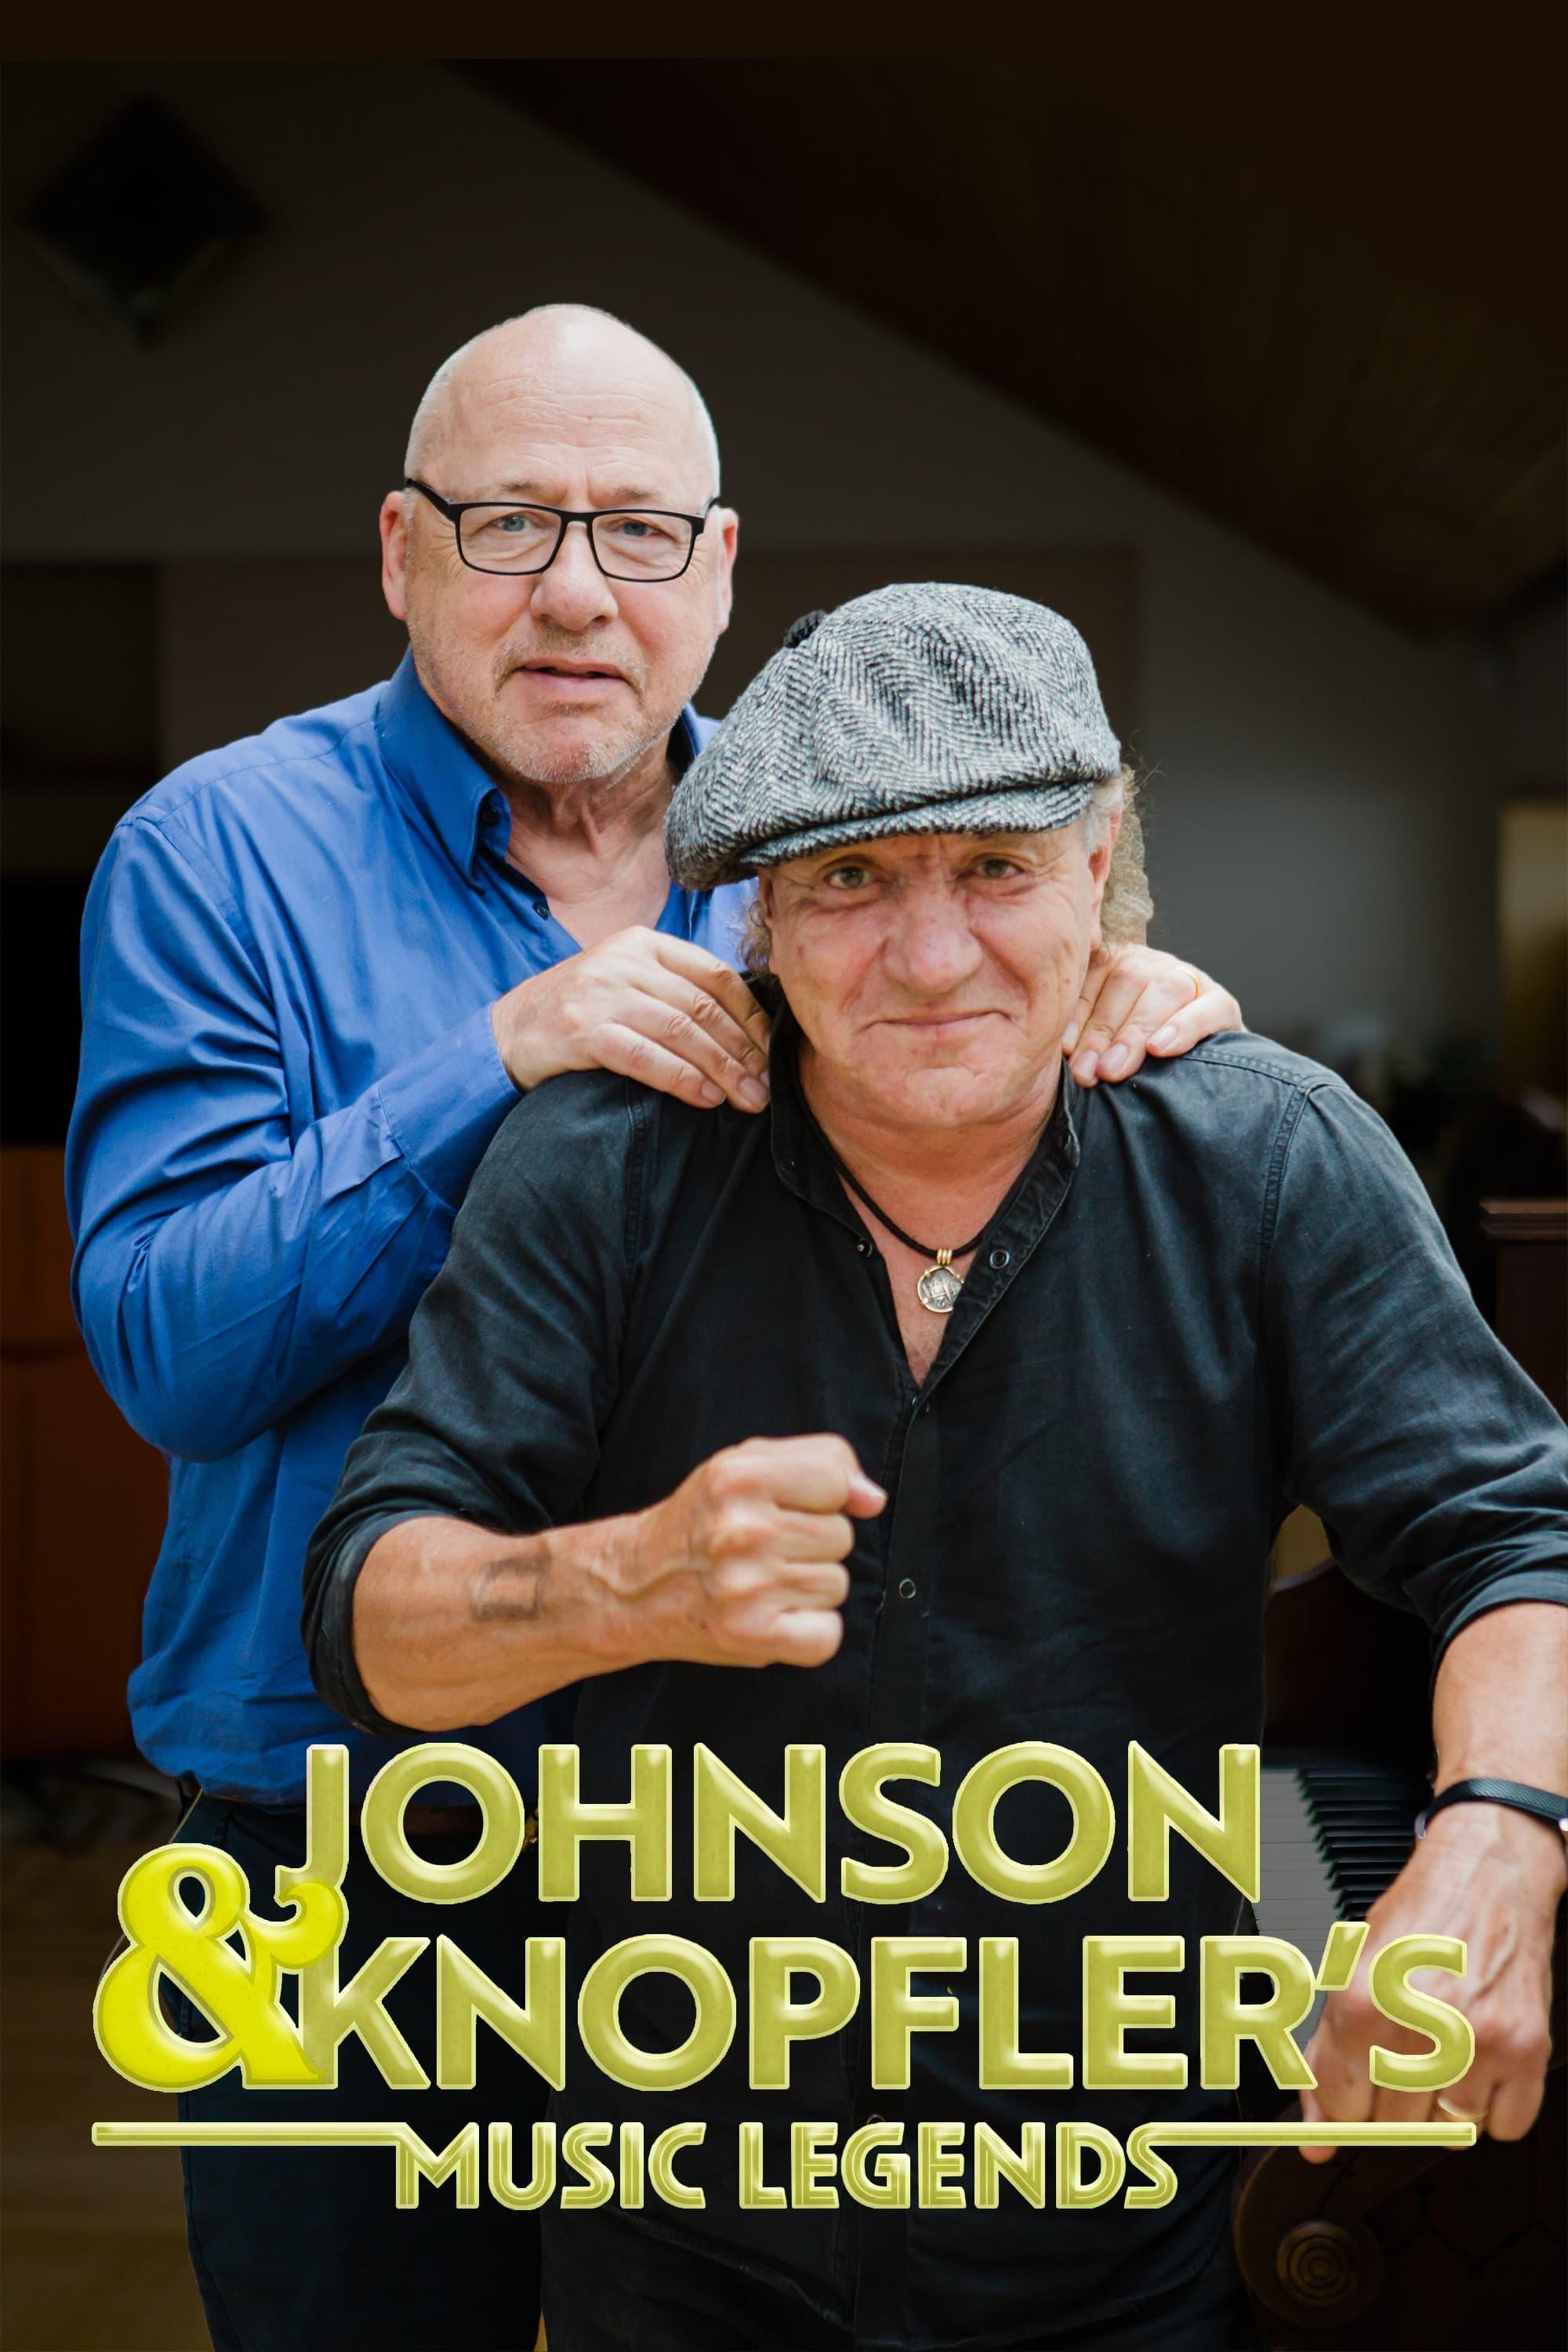 Johnson and Knopfler’s Music Legends poster